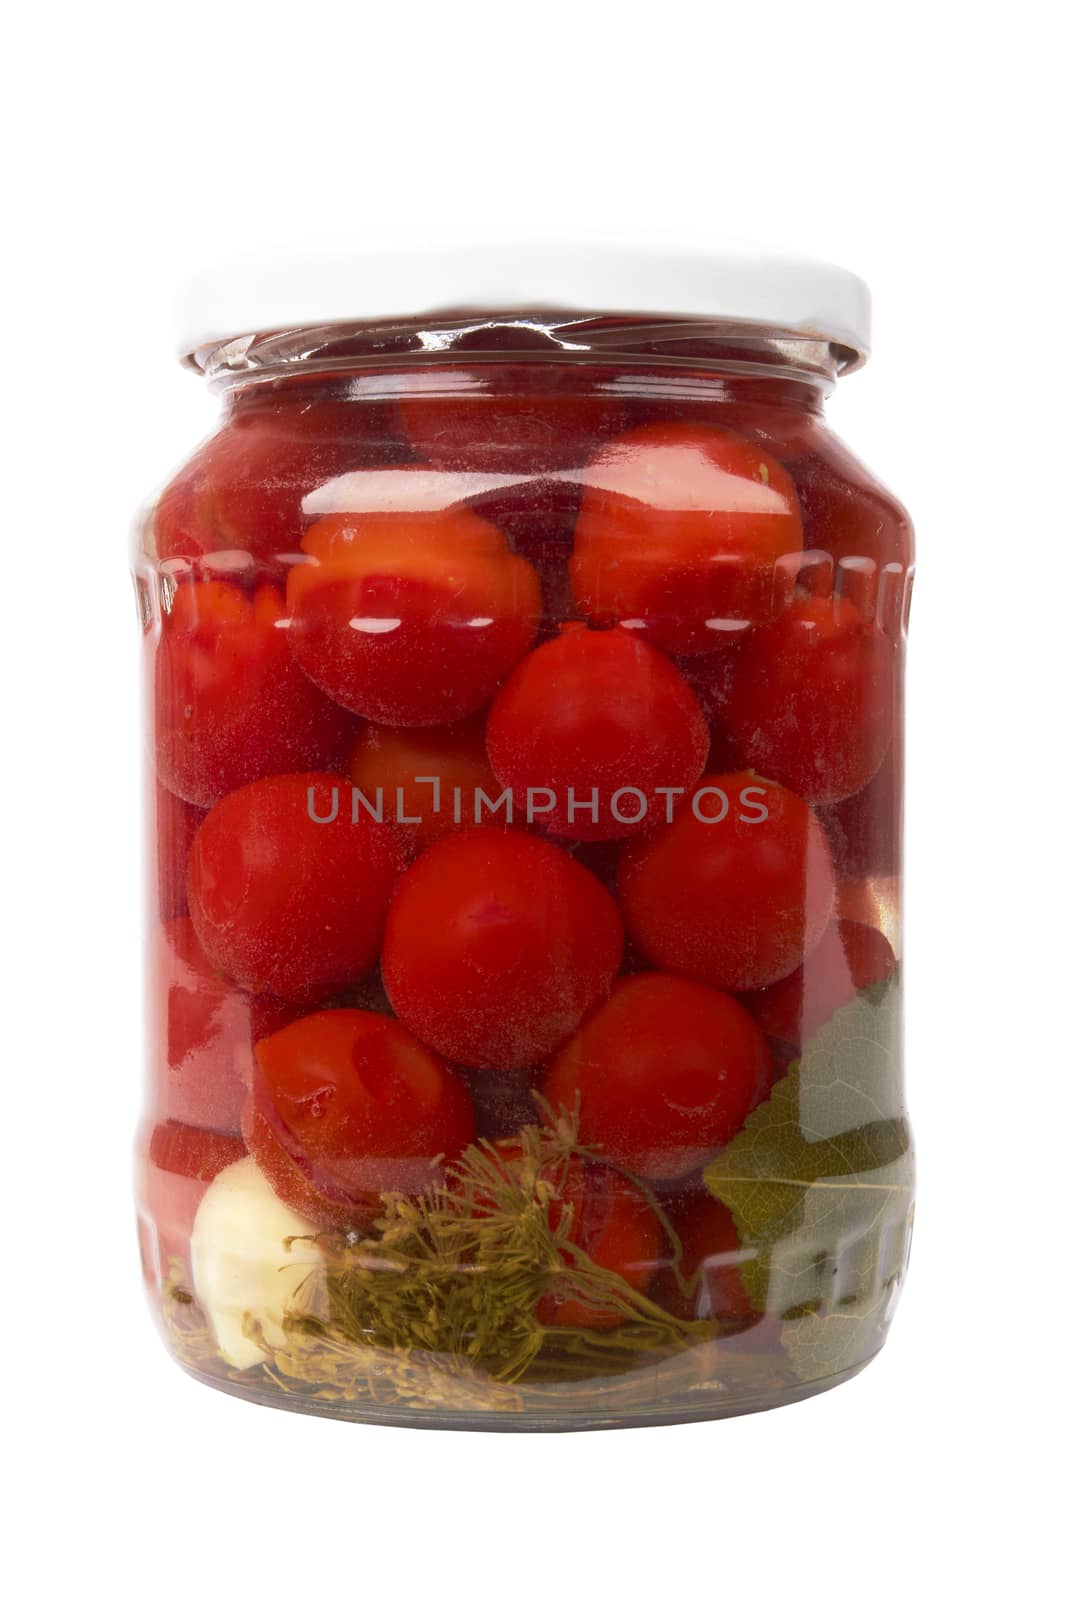 Jar of canned tomatoes by pioneer111